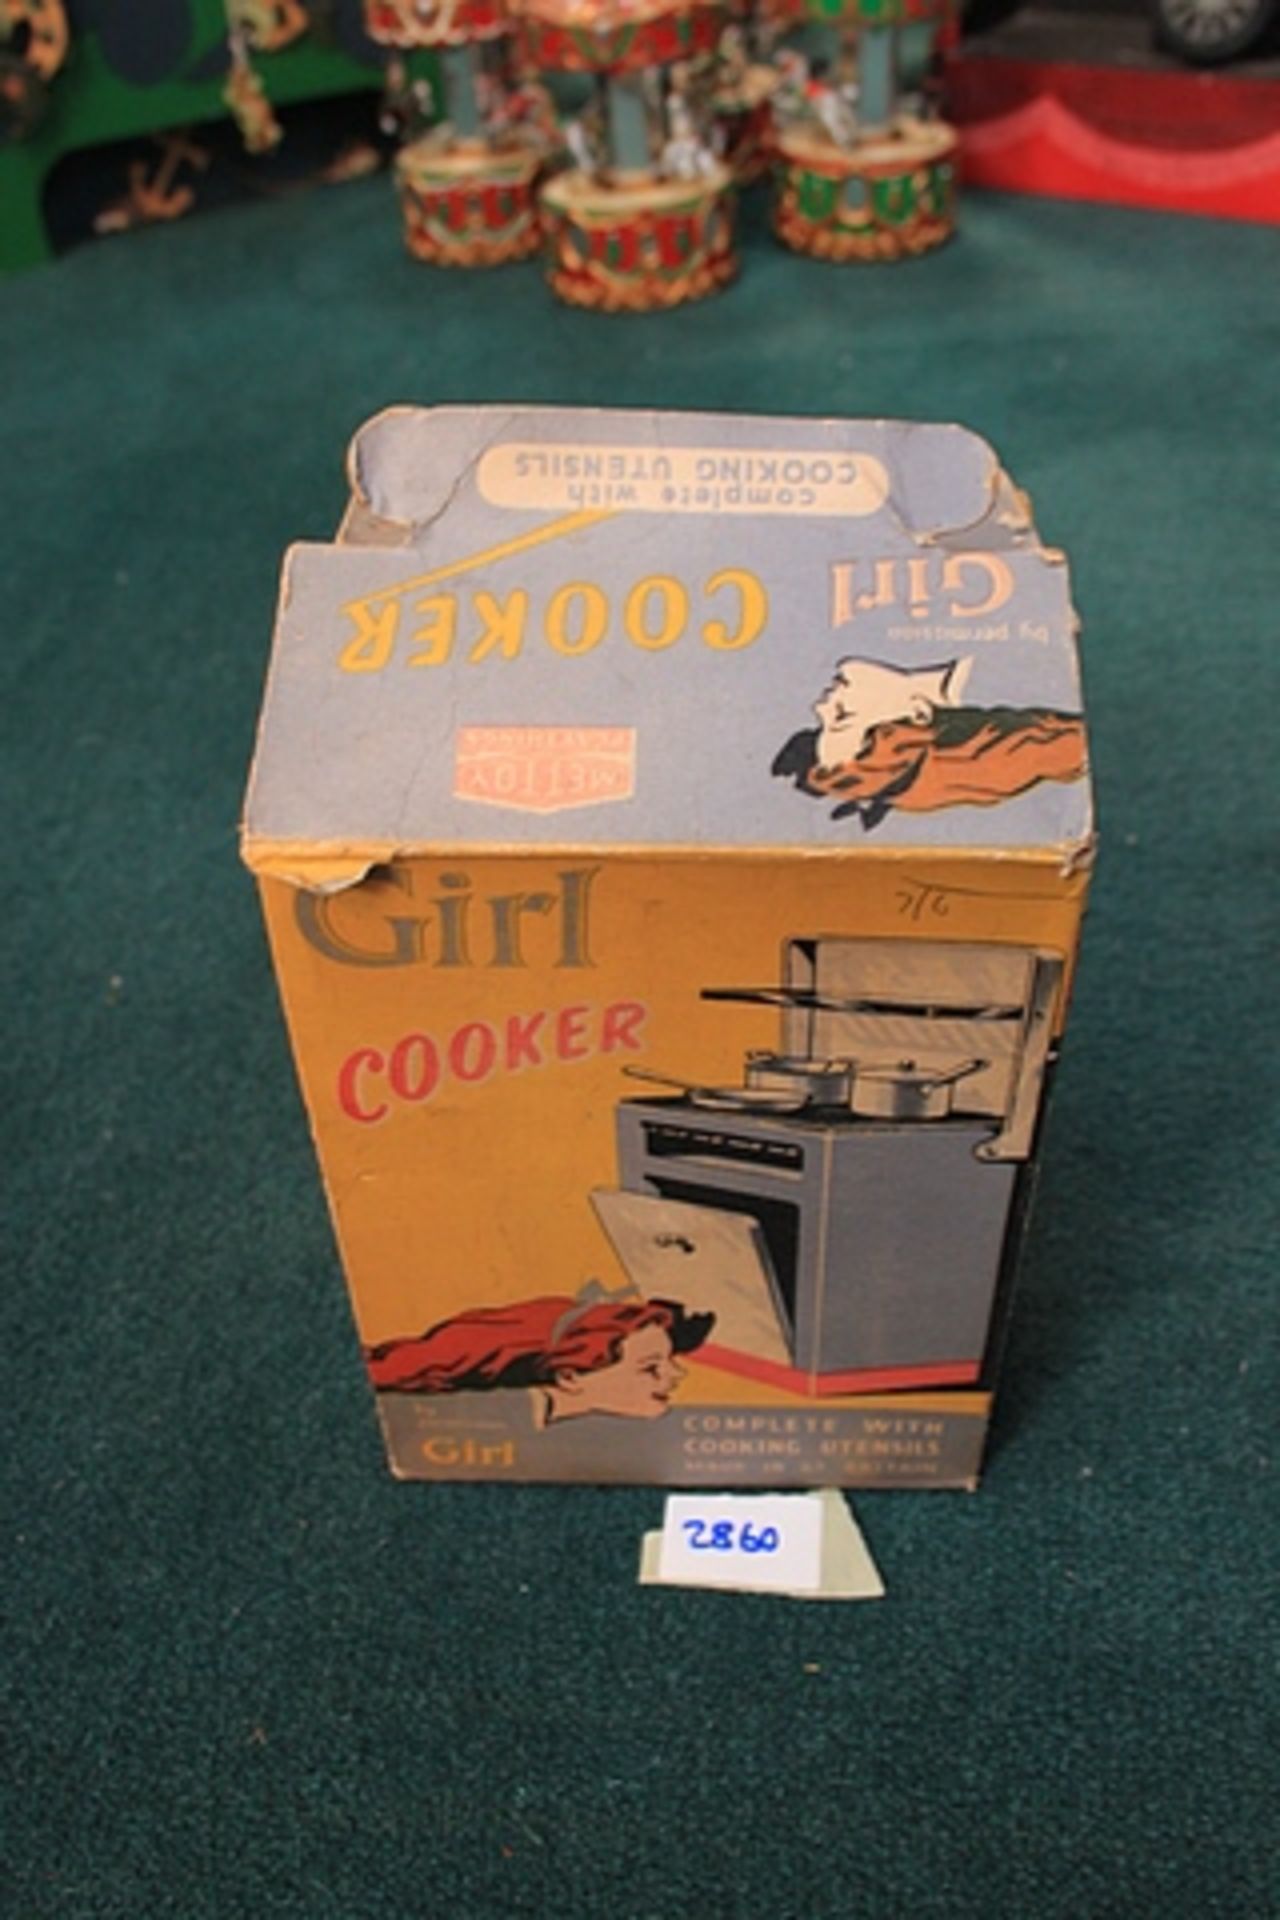 Mettoy By Permission Girl Toy Cooker Complete With Frying Pan. Complete In Box